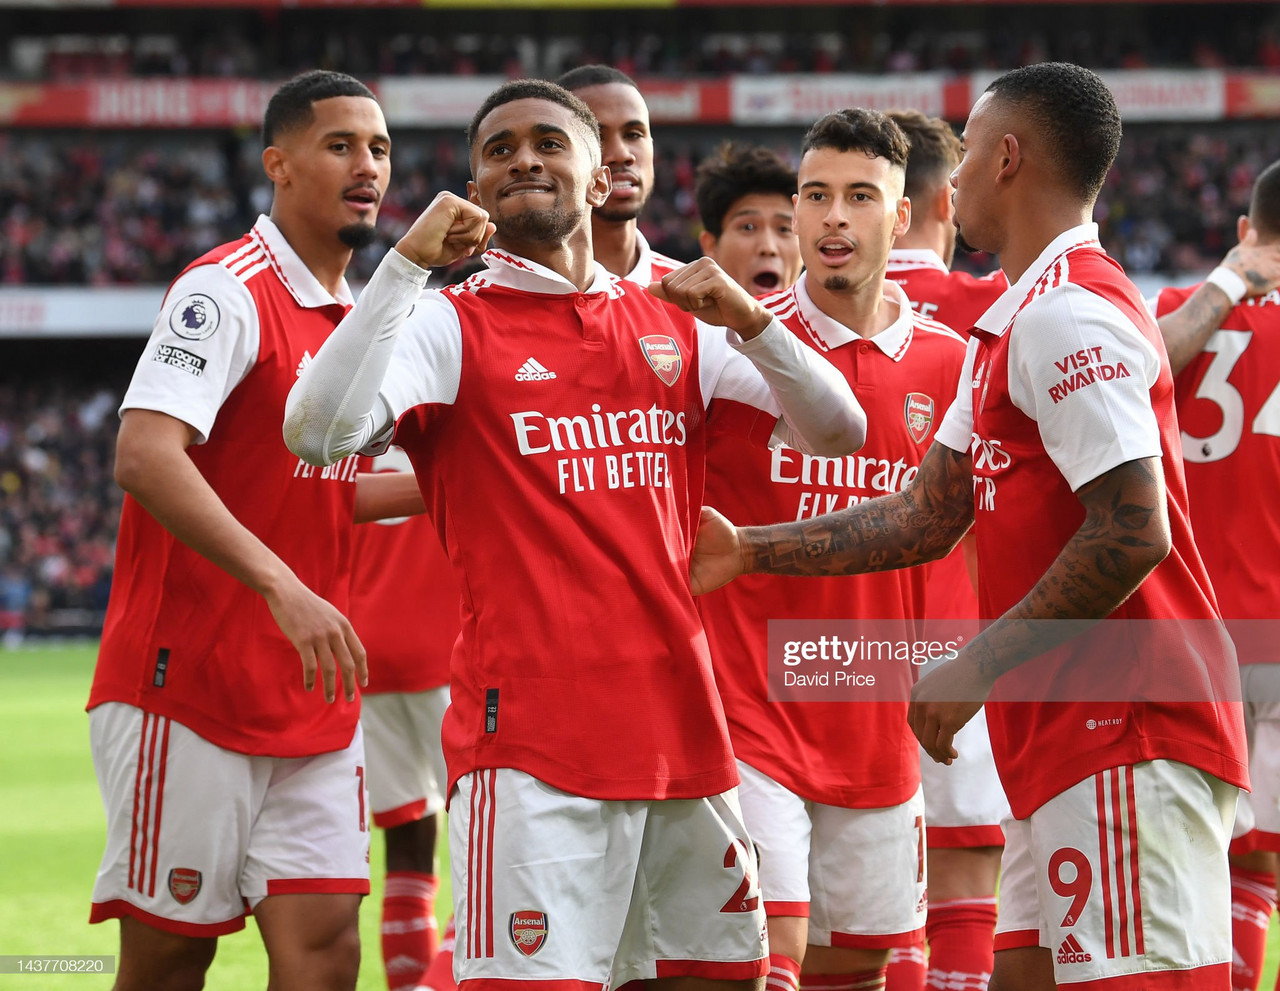 Arsenal 5-0 Nottingham Forest: Gunners return to winning ways and the top of the Premier League